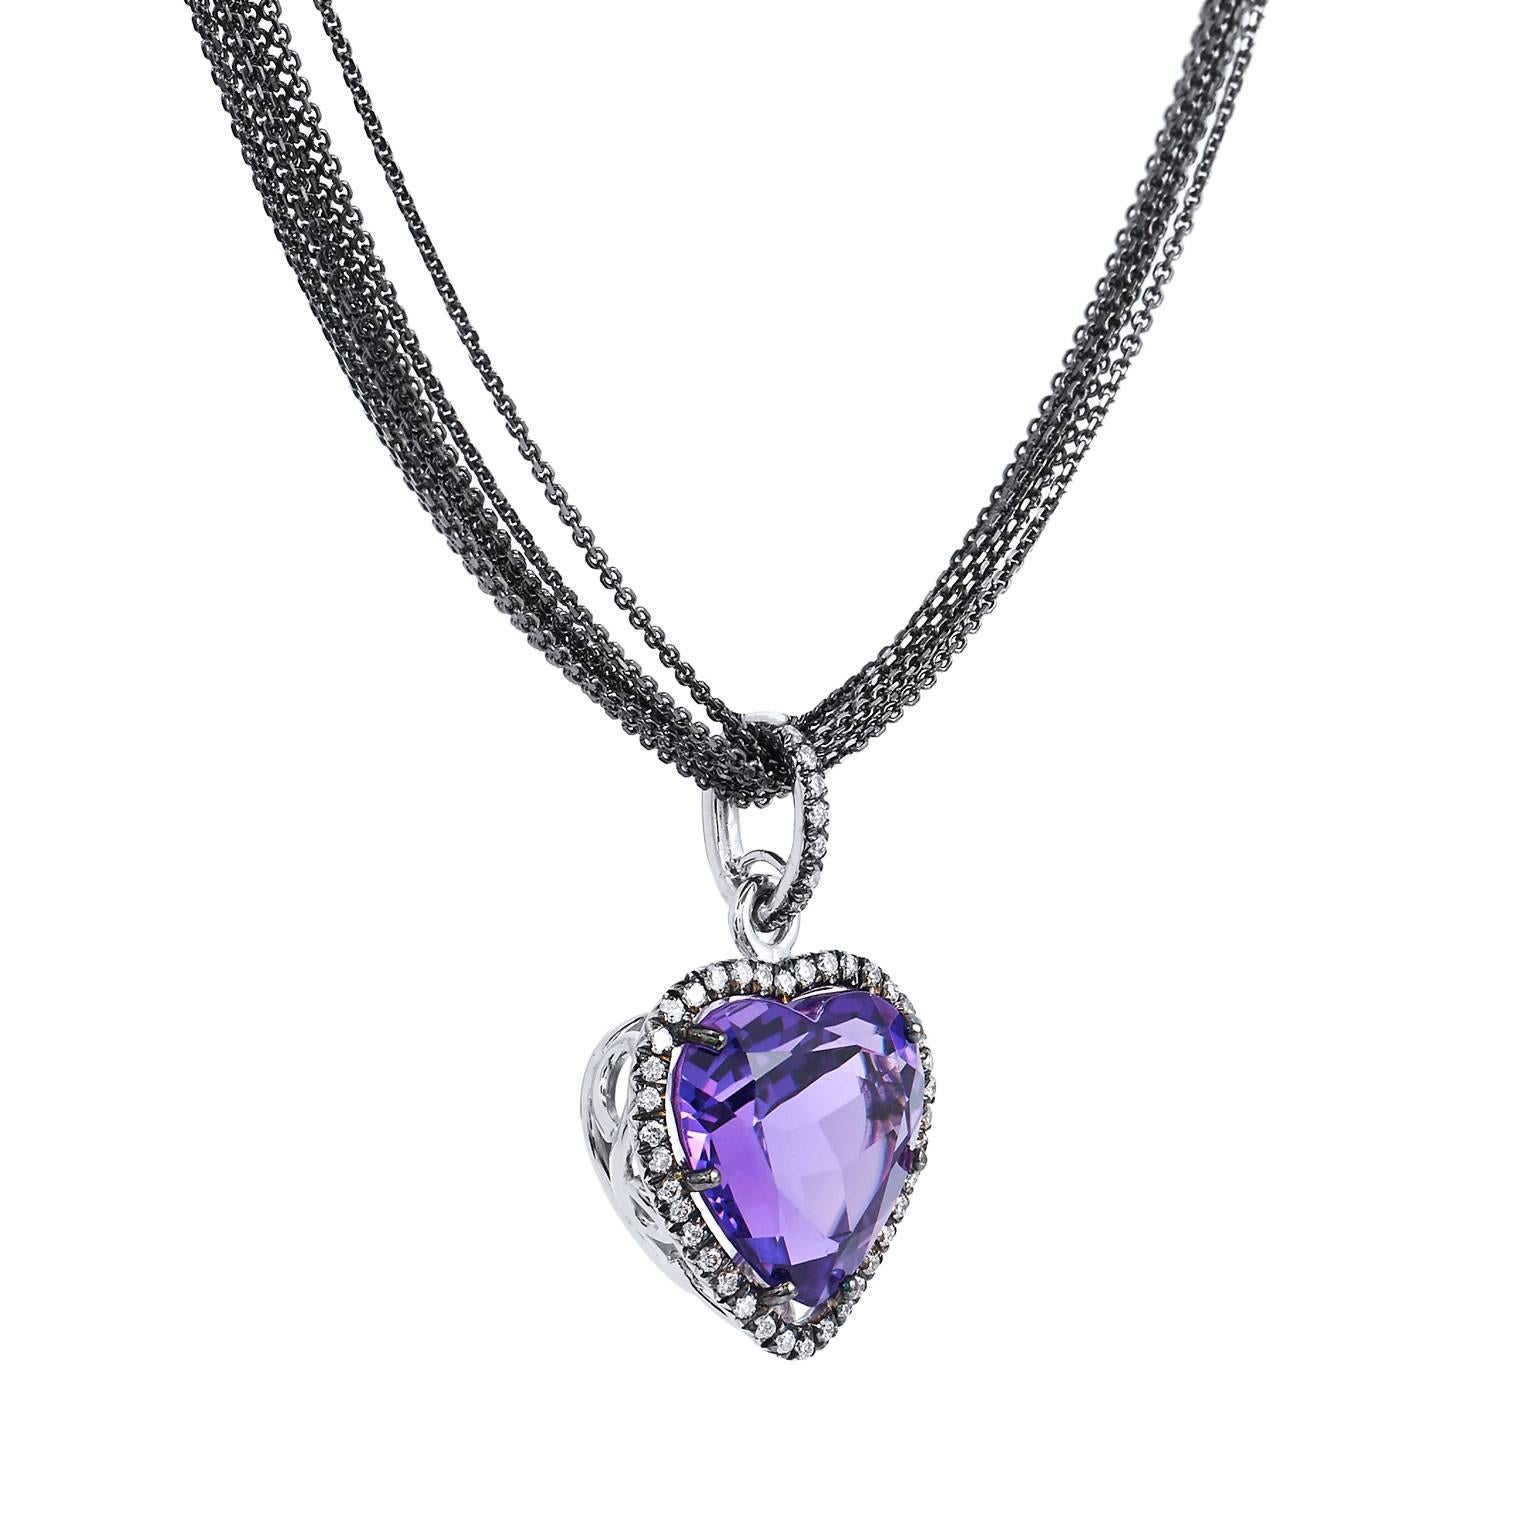 The heart, a symbol of not only deep love and affection but also, the beauty that lies at the core of one’s being. Pave set diamonds, weighing 0.25 carat (G/H/VS), embrace a 6.76 carat heart-shaped amethyst at center gracefully. Amethyst is a